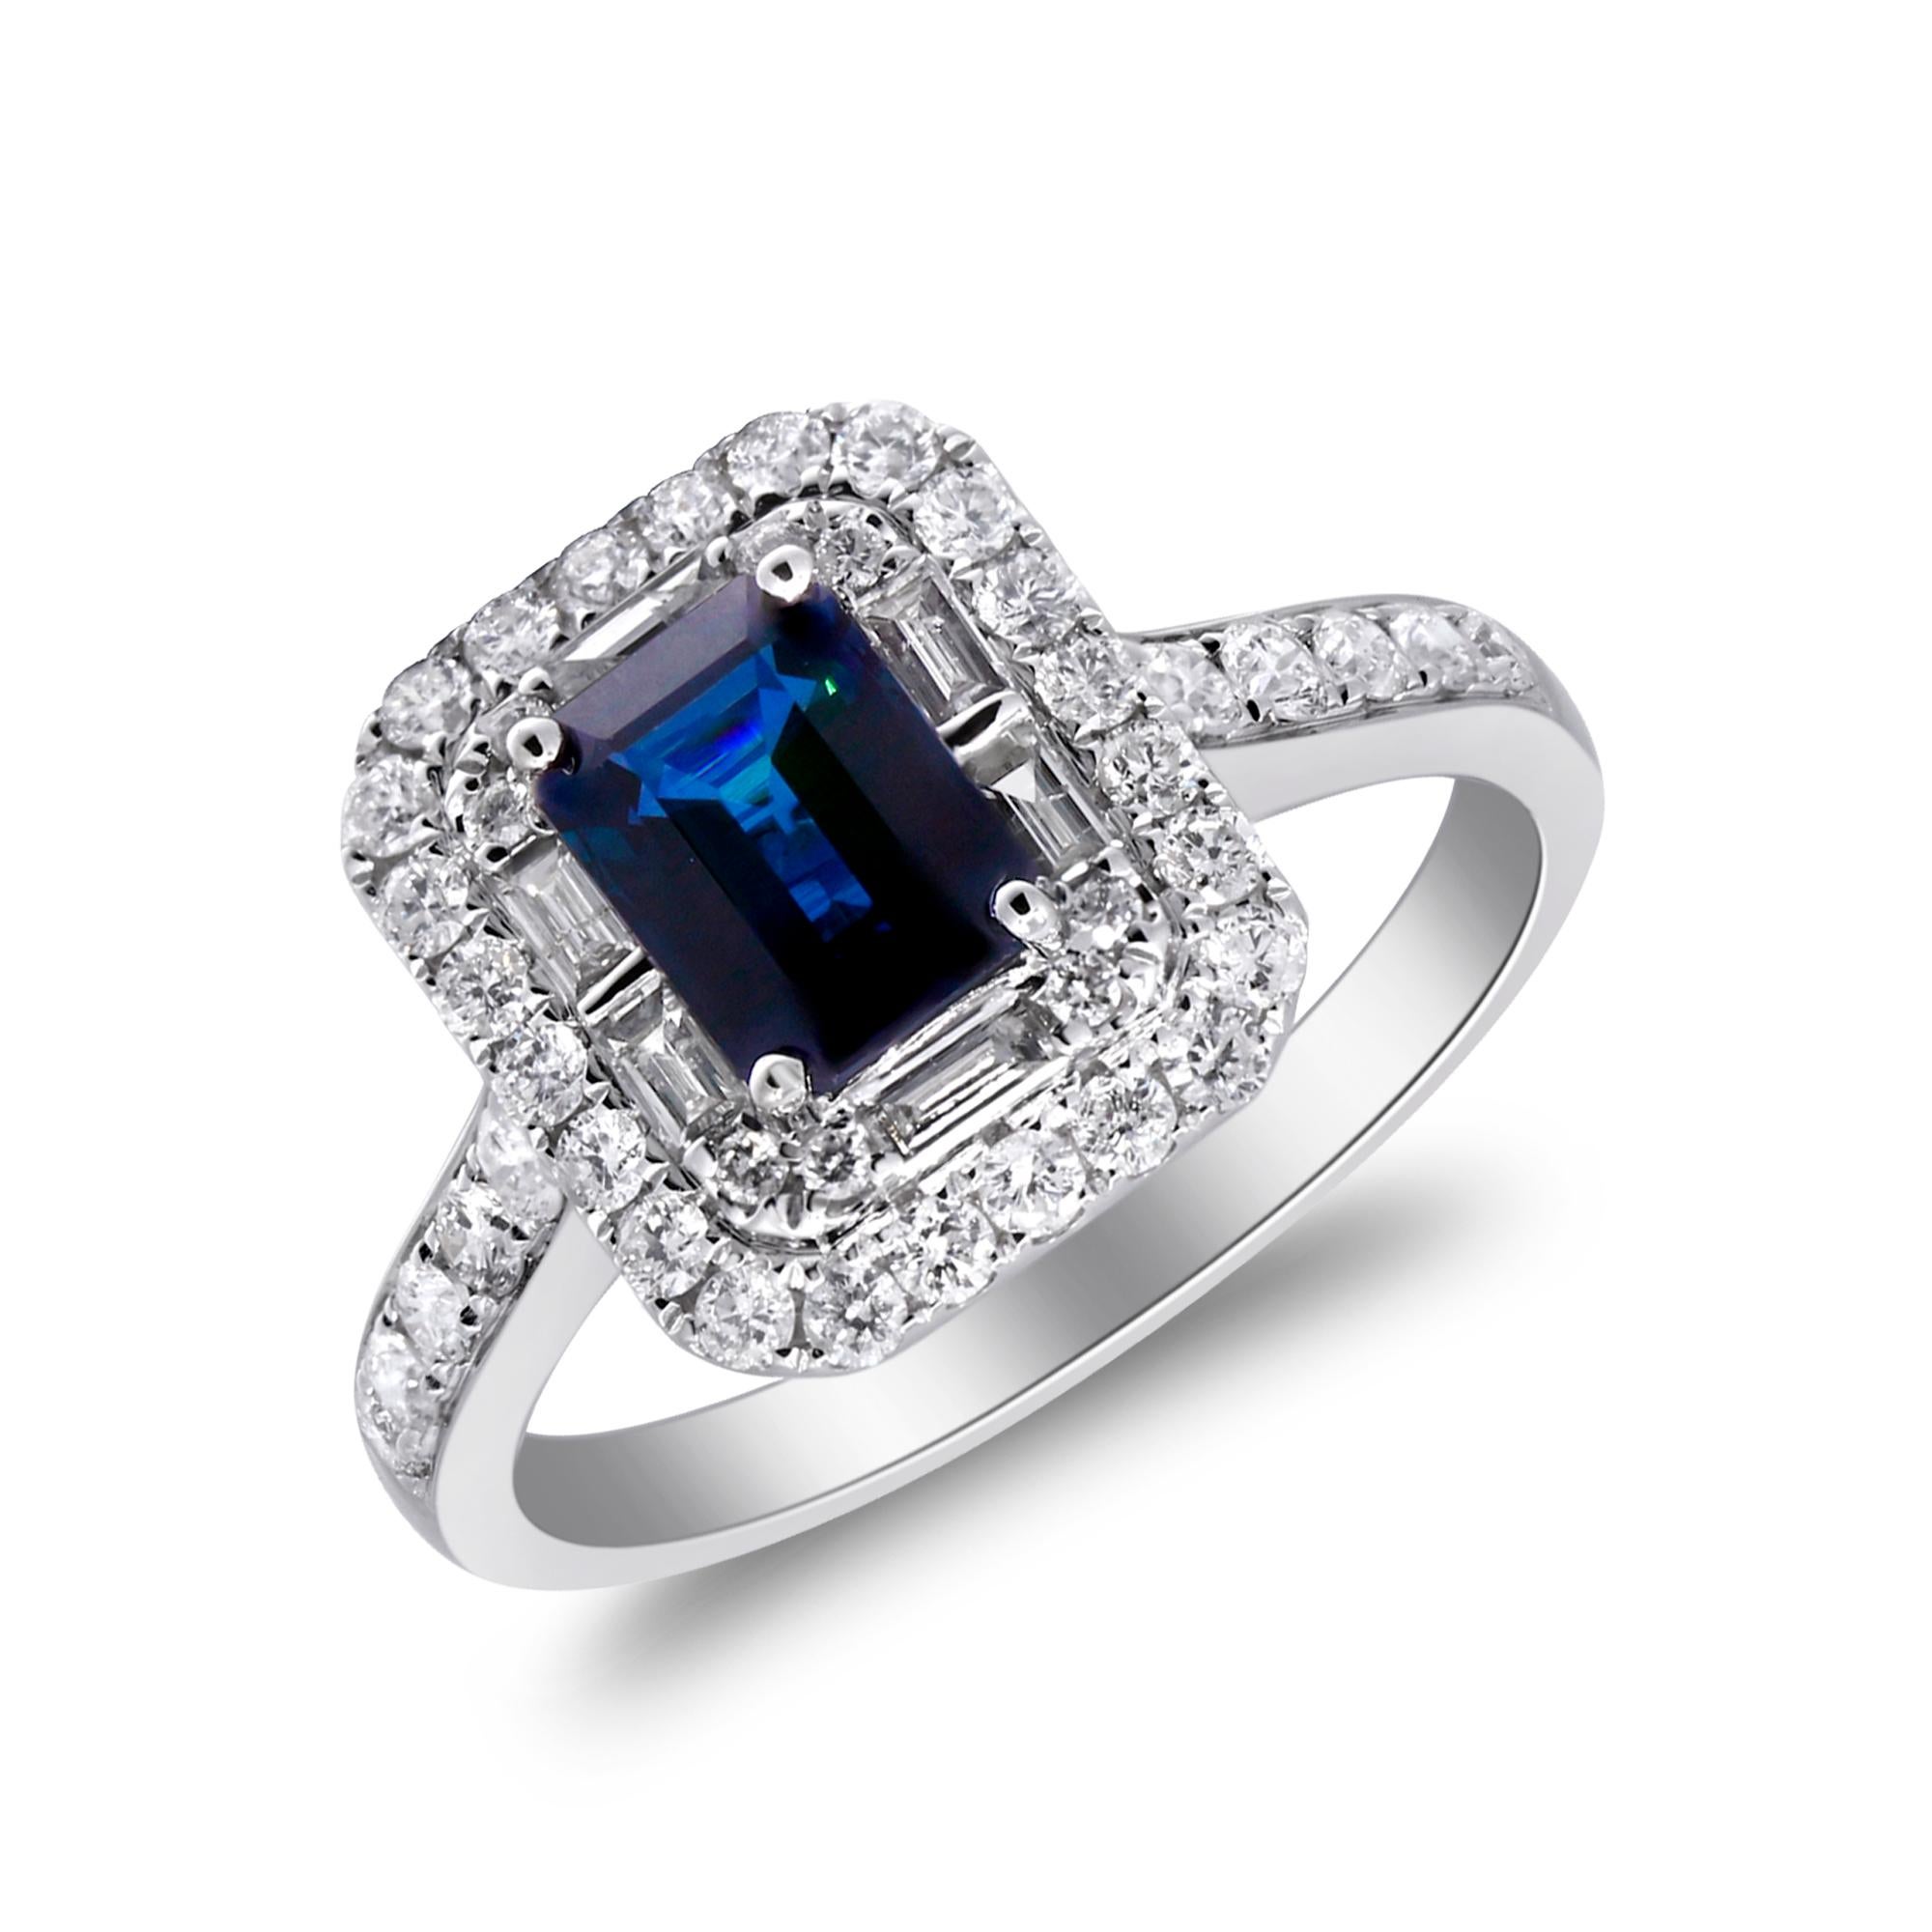 Art Deco 1.18 Carat Emerald-Cut Blue Sapphire with Diamond Accents 10K White Gold Ring For Sale